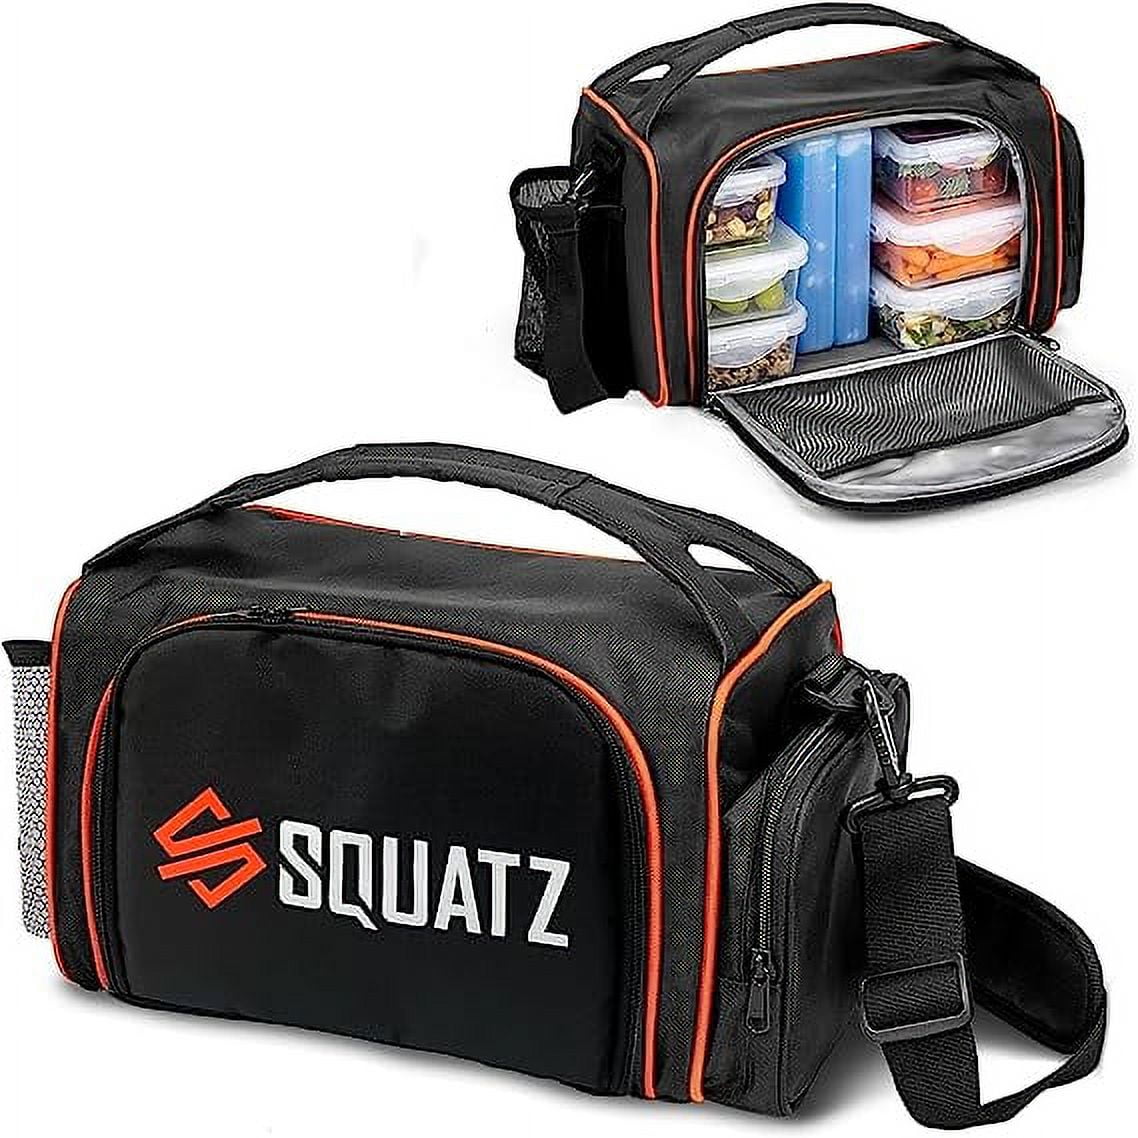 Squatz Insulated Meal Prep Lunch Bag 13 Lbs Maximum Capacity Heavy Duty  Double Insulation Container